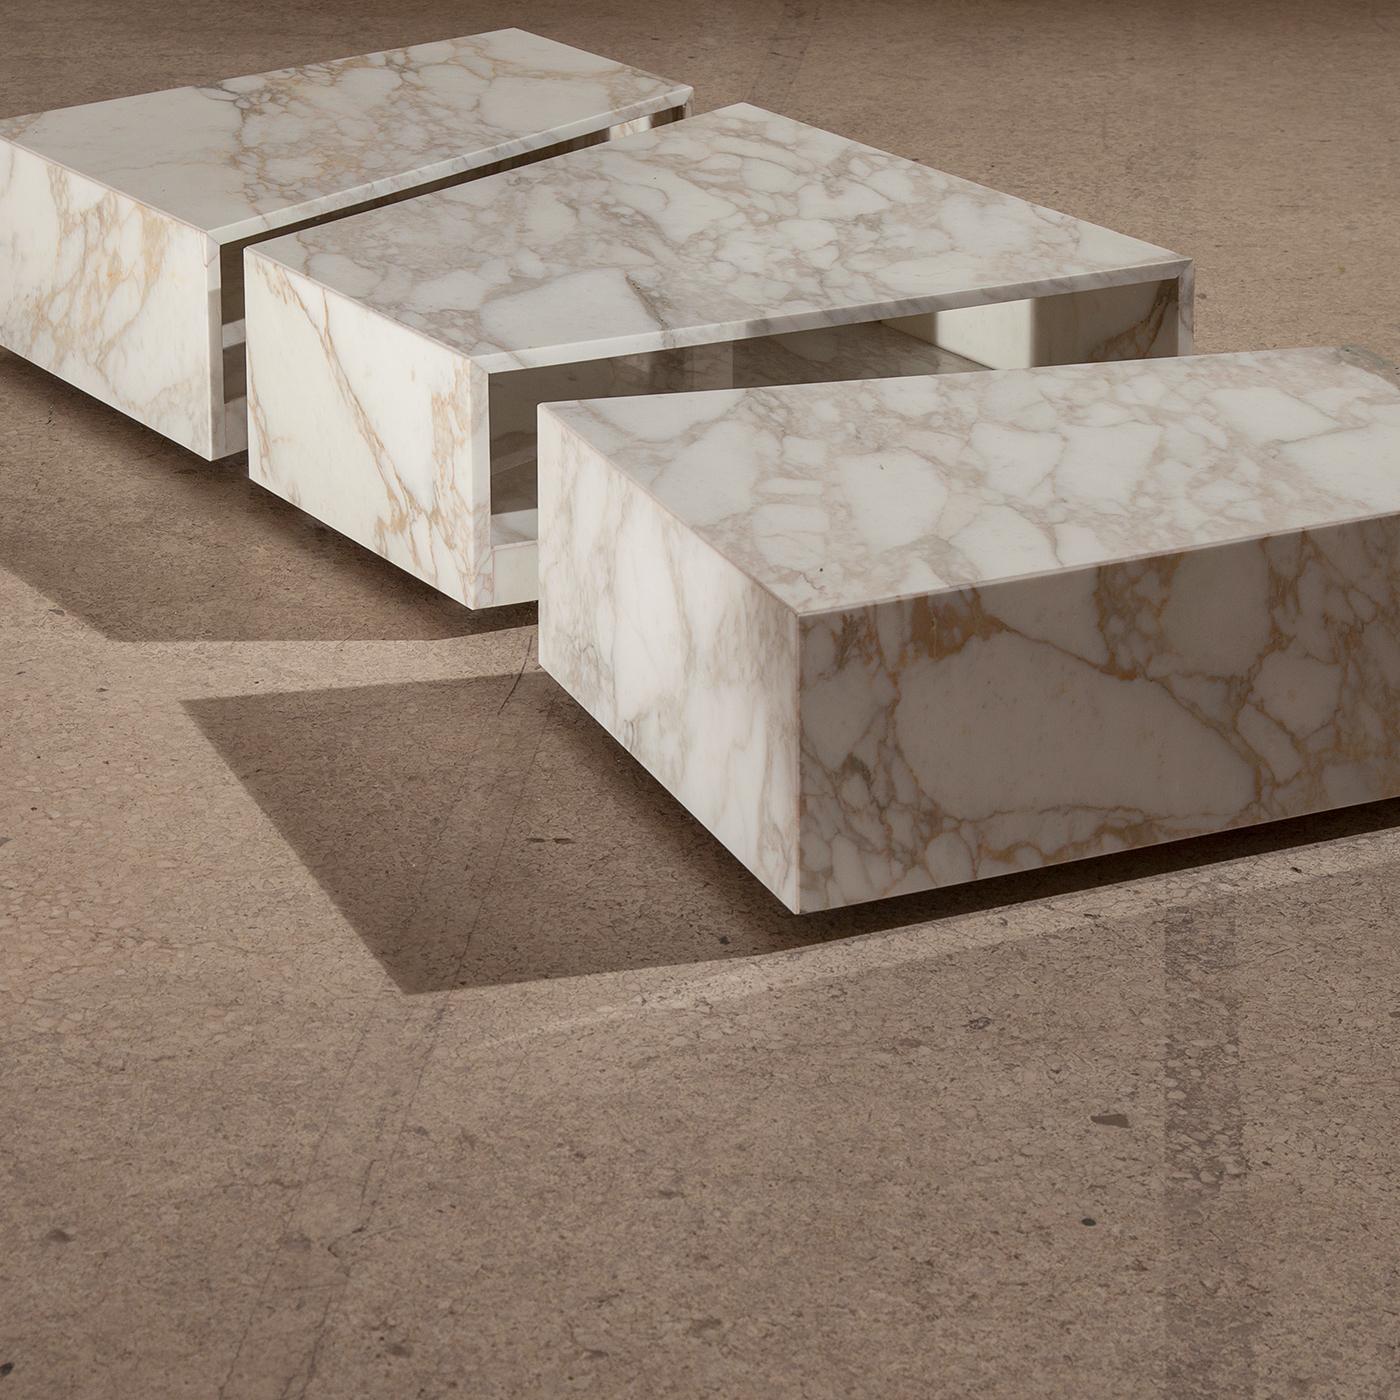 This majestic coffee table is not only a striking object of functional decor but doubles as a storage unit. The bold profile is composed of three pieces equipped with rollable wheels, made of white Calacatta marble, showcasing its singular thick